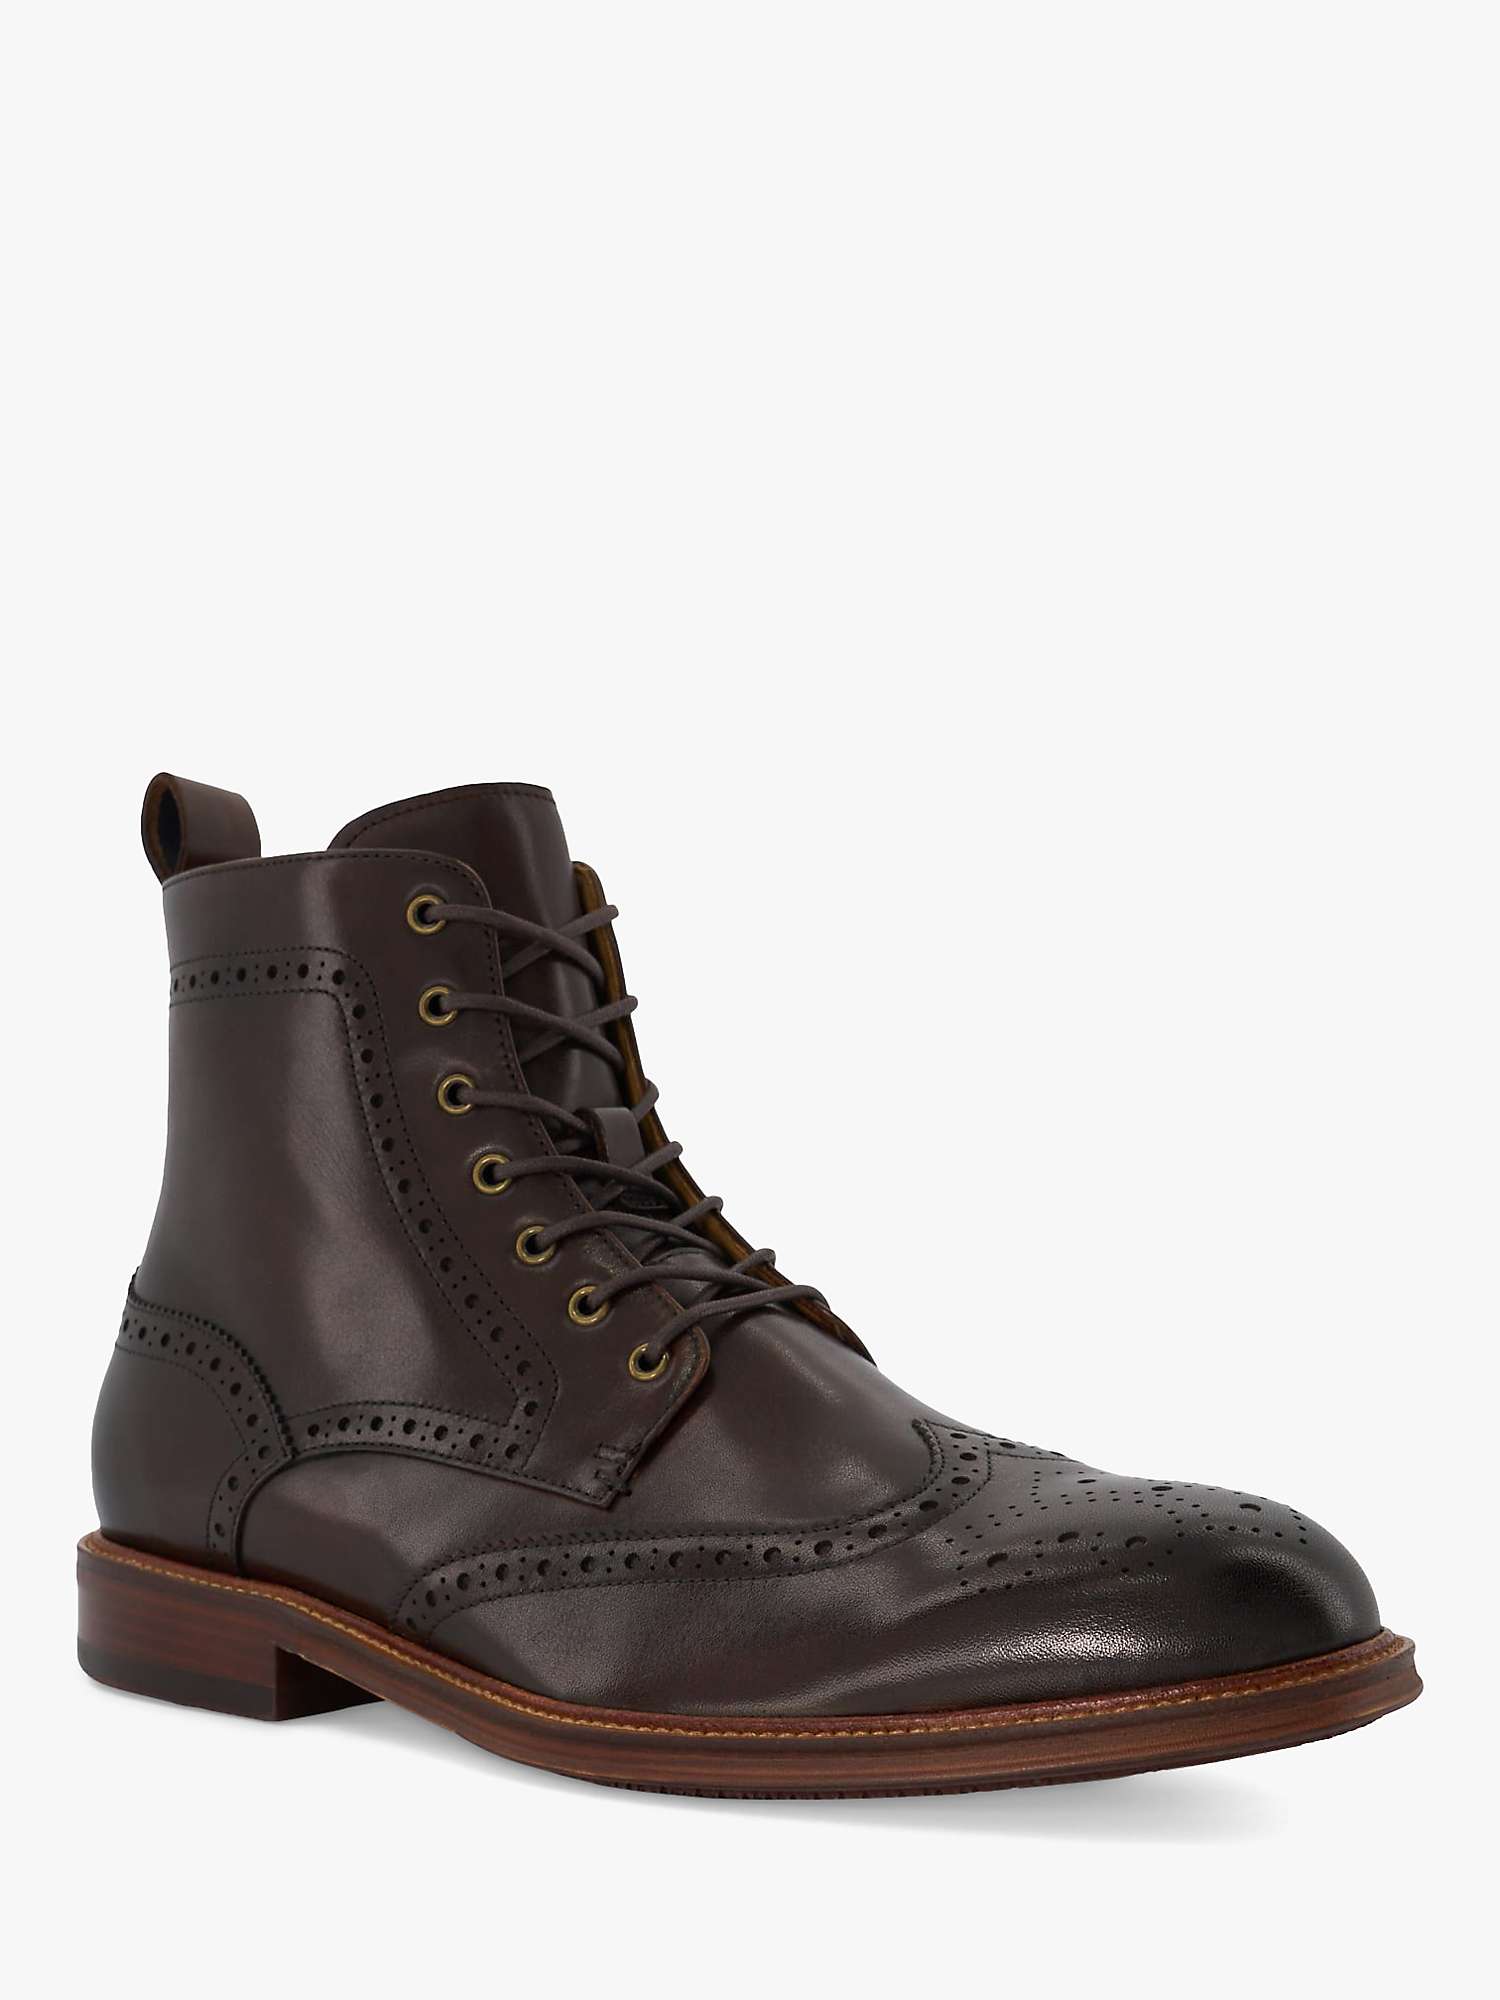 Buy Dune Morrals Lace Up Brogue Boots Online at johnlewis.com